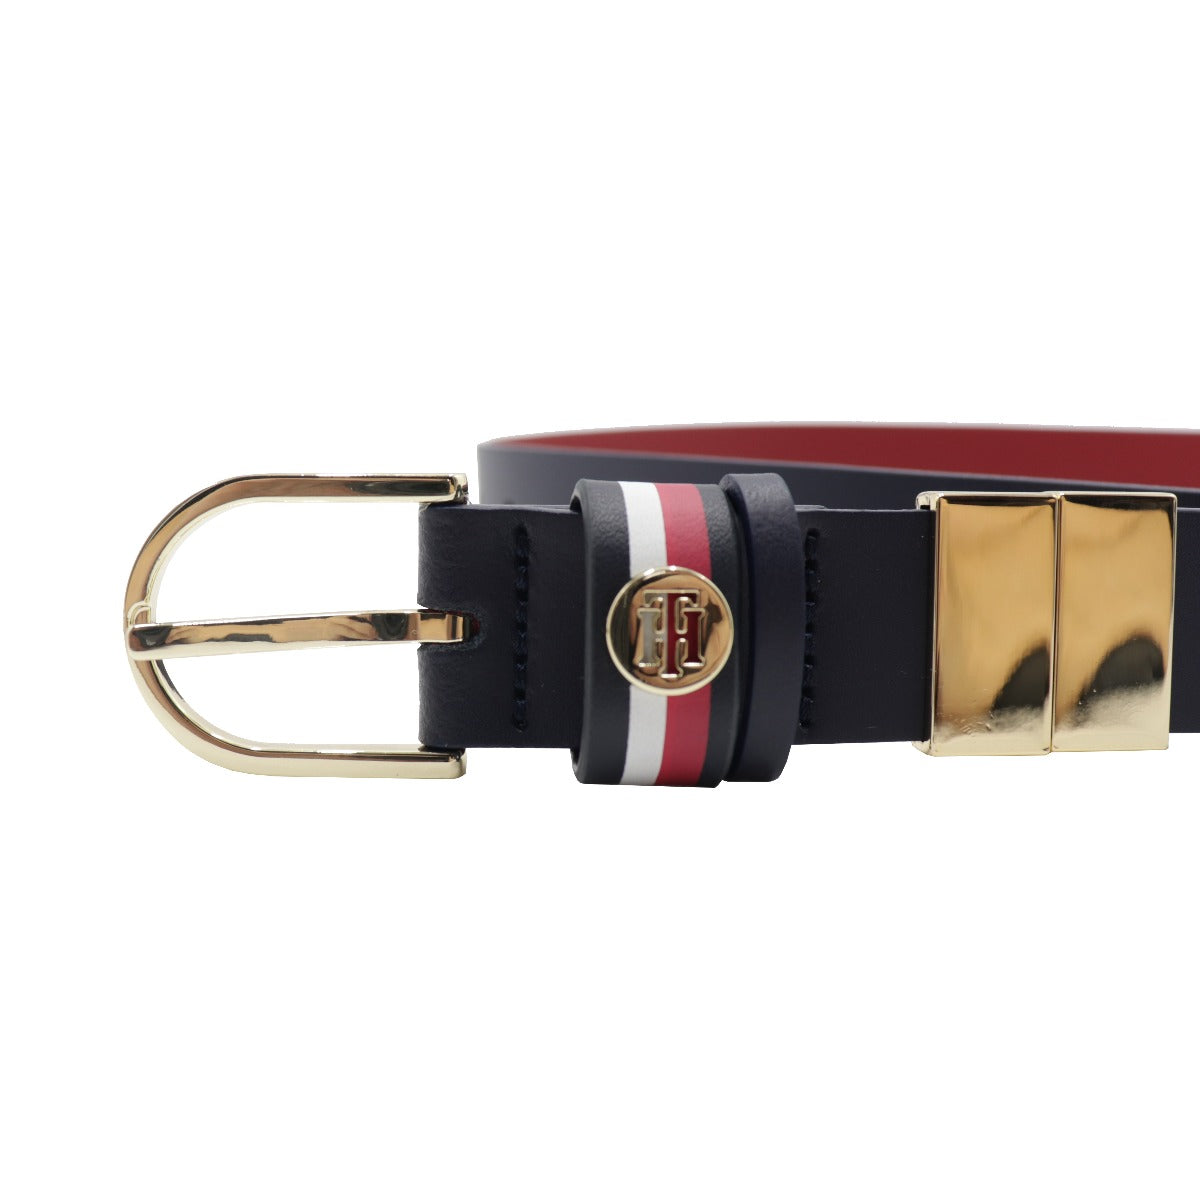 Tommy-Hilfiger-Cintura-in-Pelle-Liscia-passante-Logato-AW0AW10582-0GY